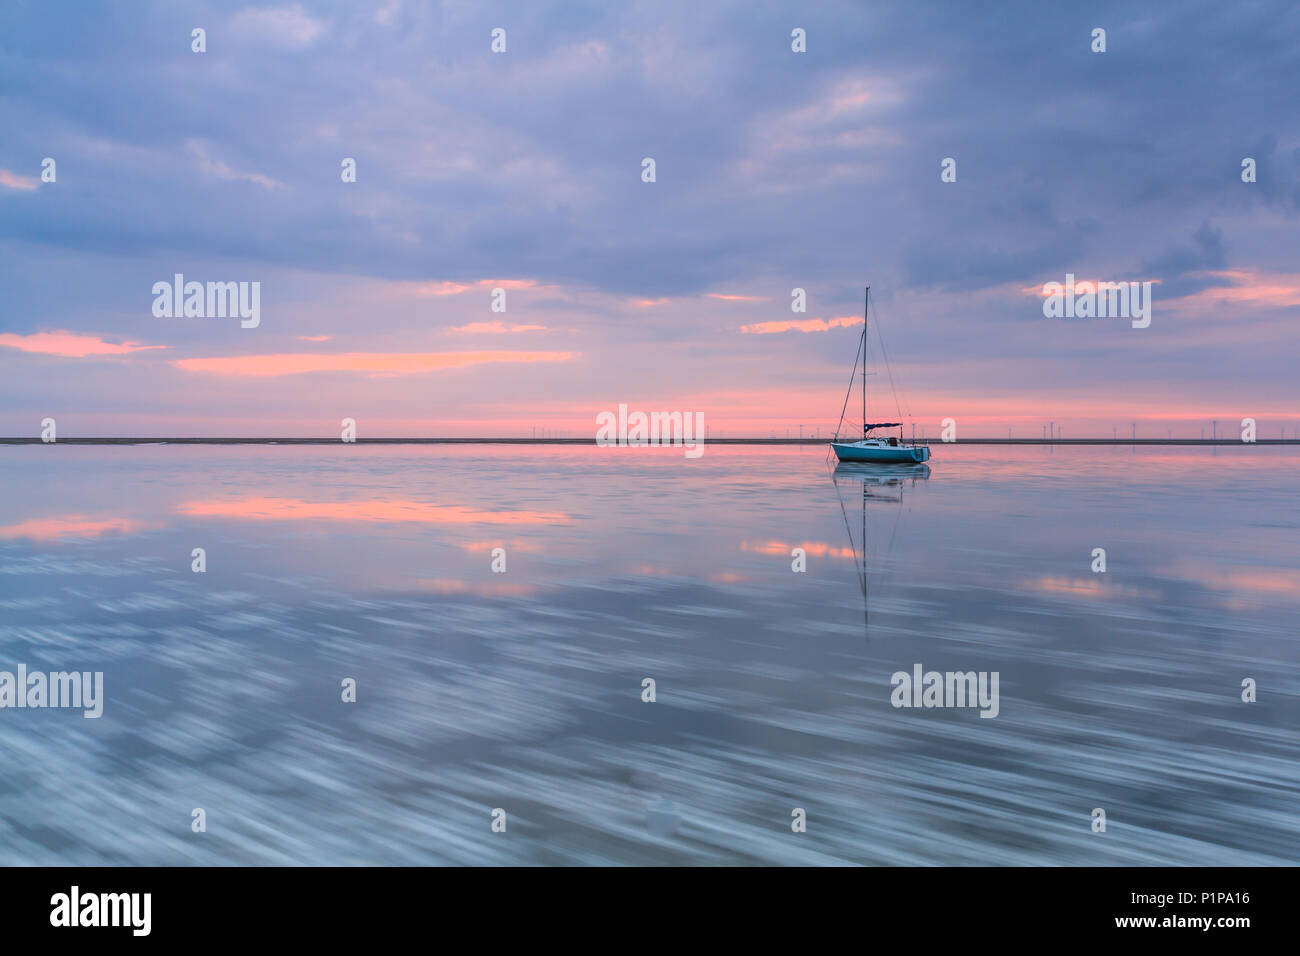 Sunset at Meols, Wirral, UK, with high tide and yachts Stock Photo